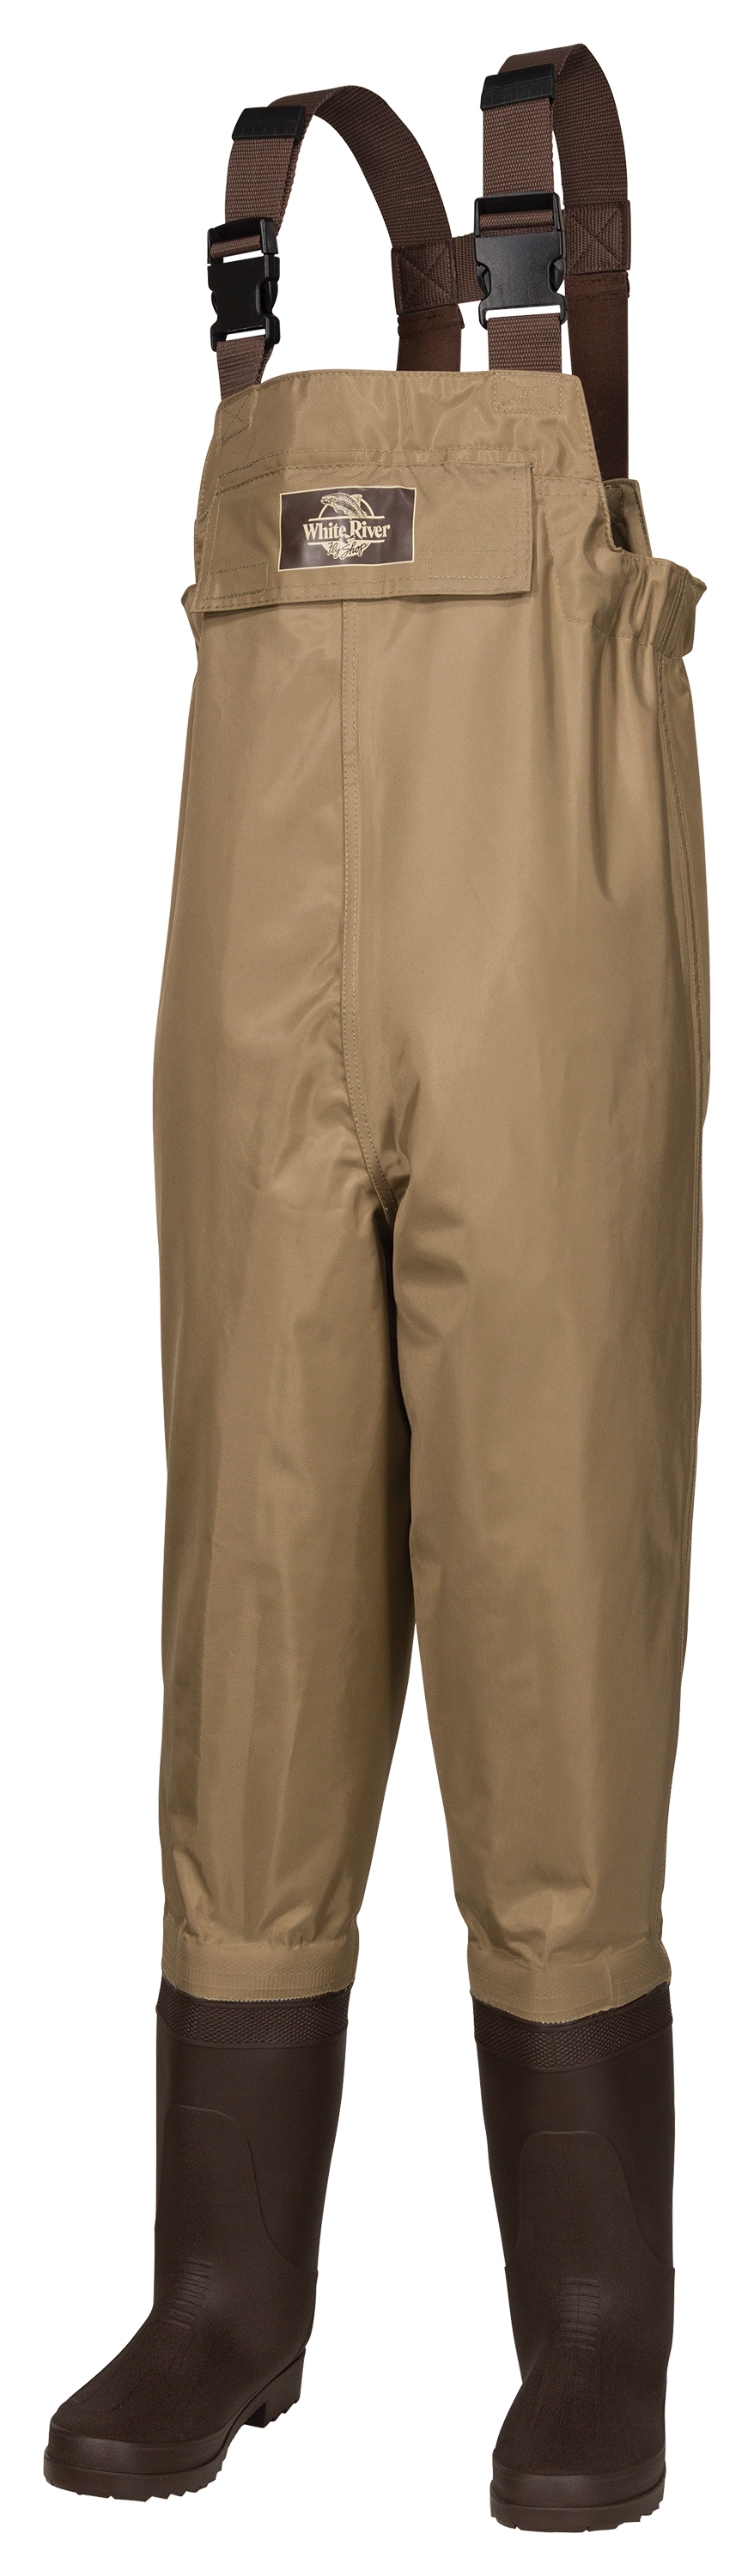 NEW - White River Fly Shop Fishing Waders size XL + Size 12 Booties -  sporting goods - by owner - sale - craigslist